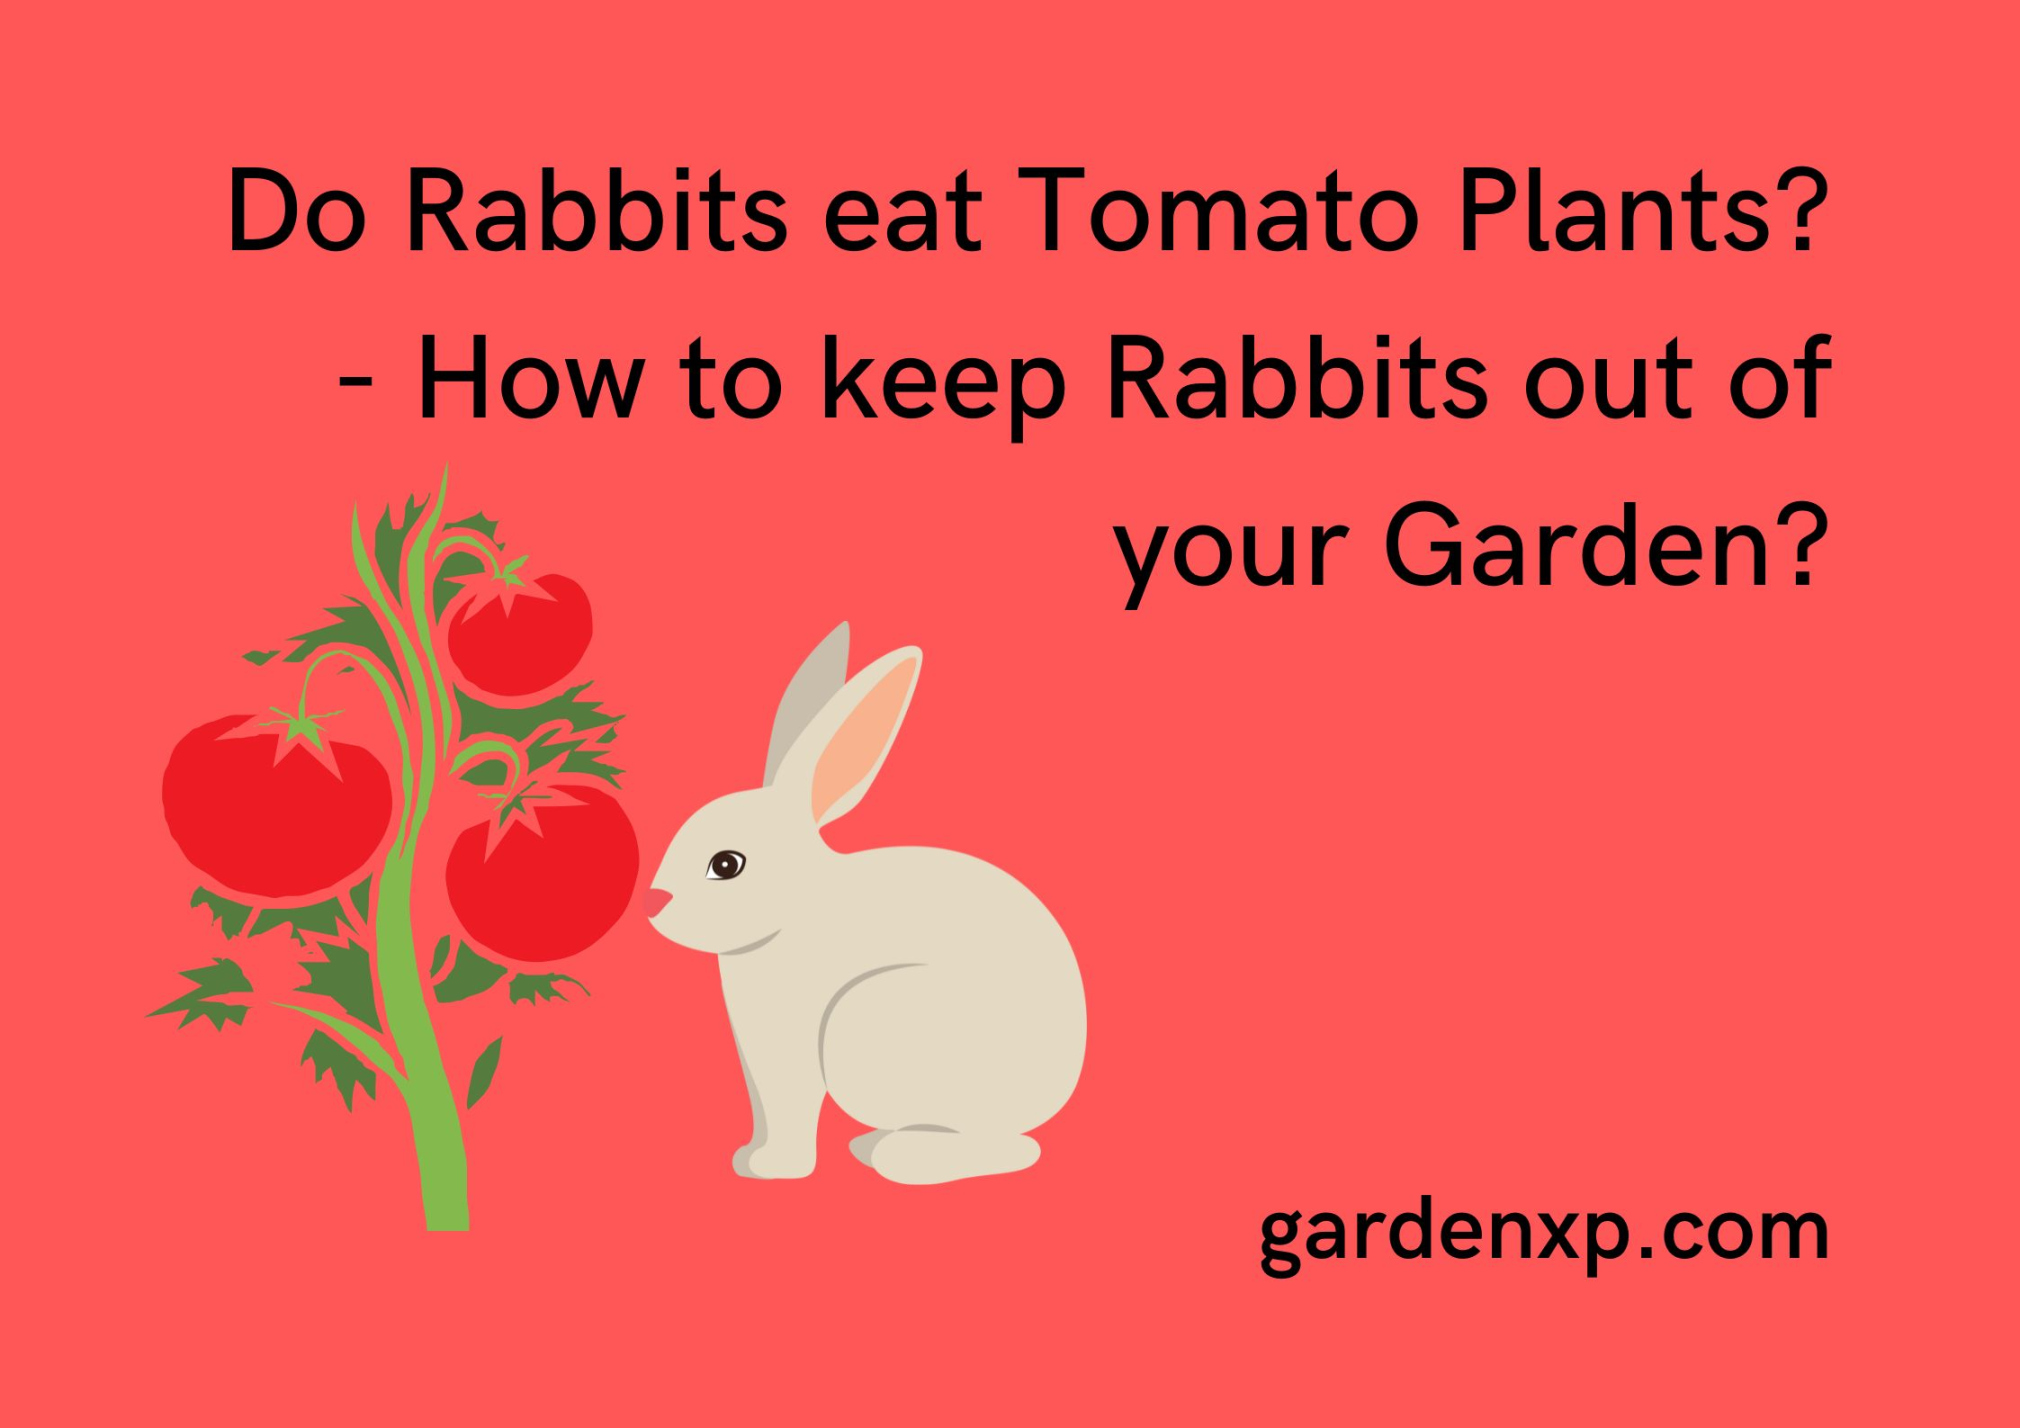 Do Rabbits eat Tomato Plants? - How to keep Rabbits out of your